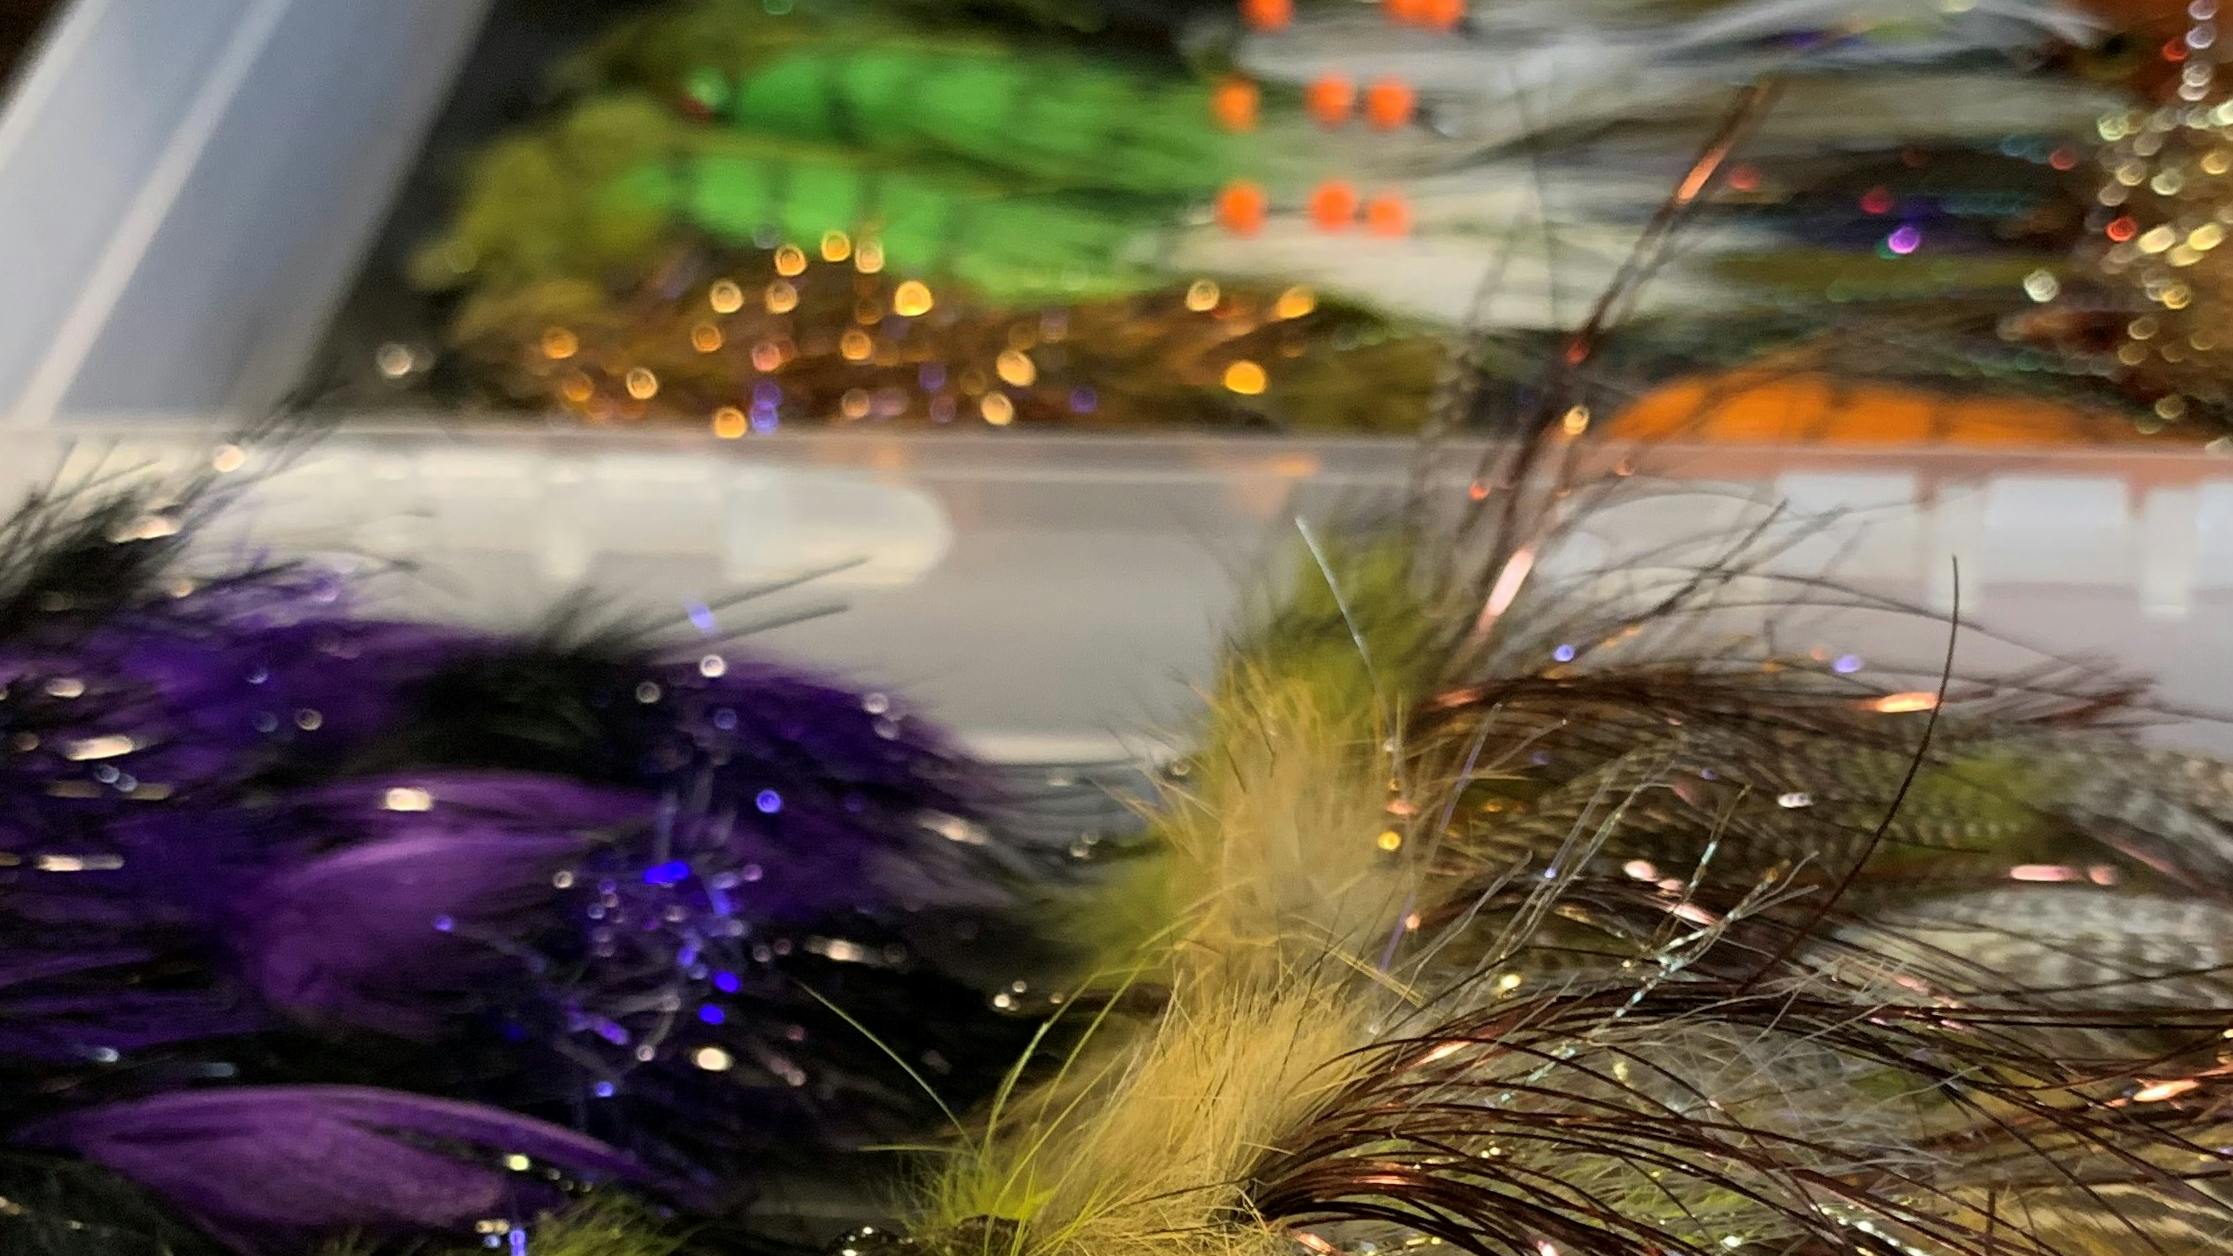 A shot of the open and completed fly box filled with colorful and sparkly streamers.  